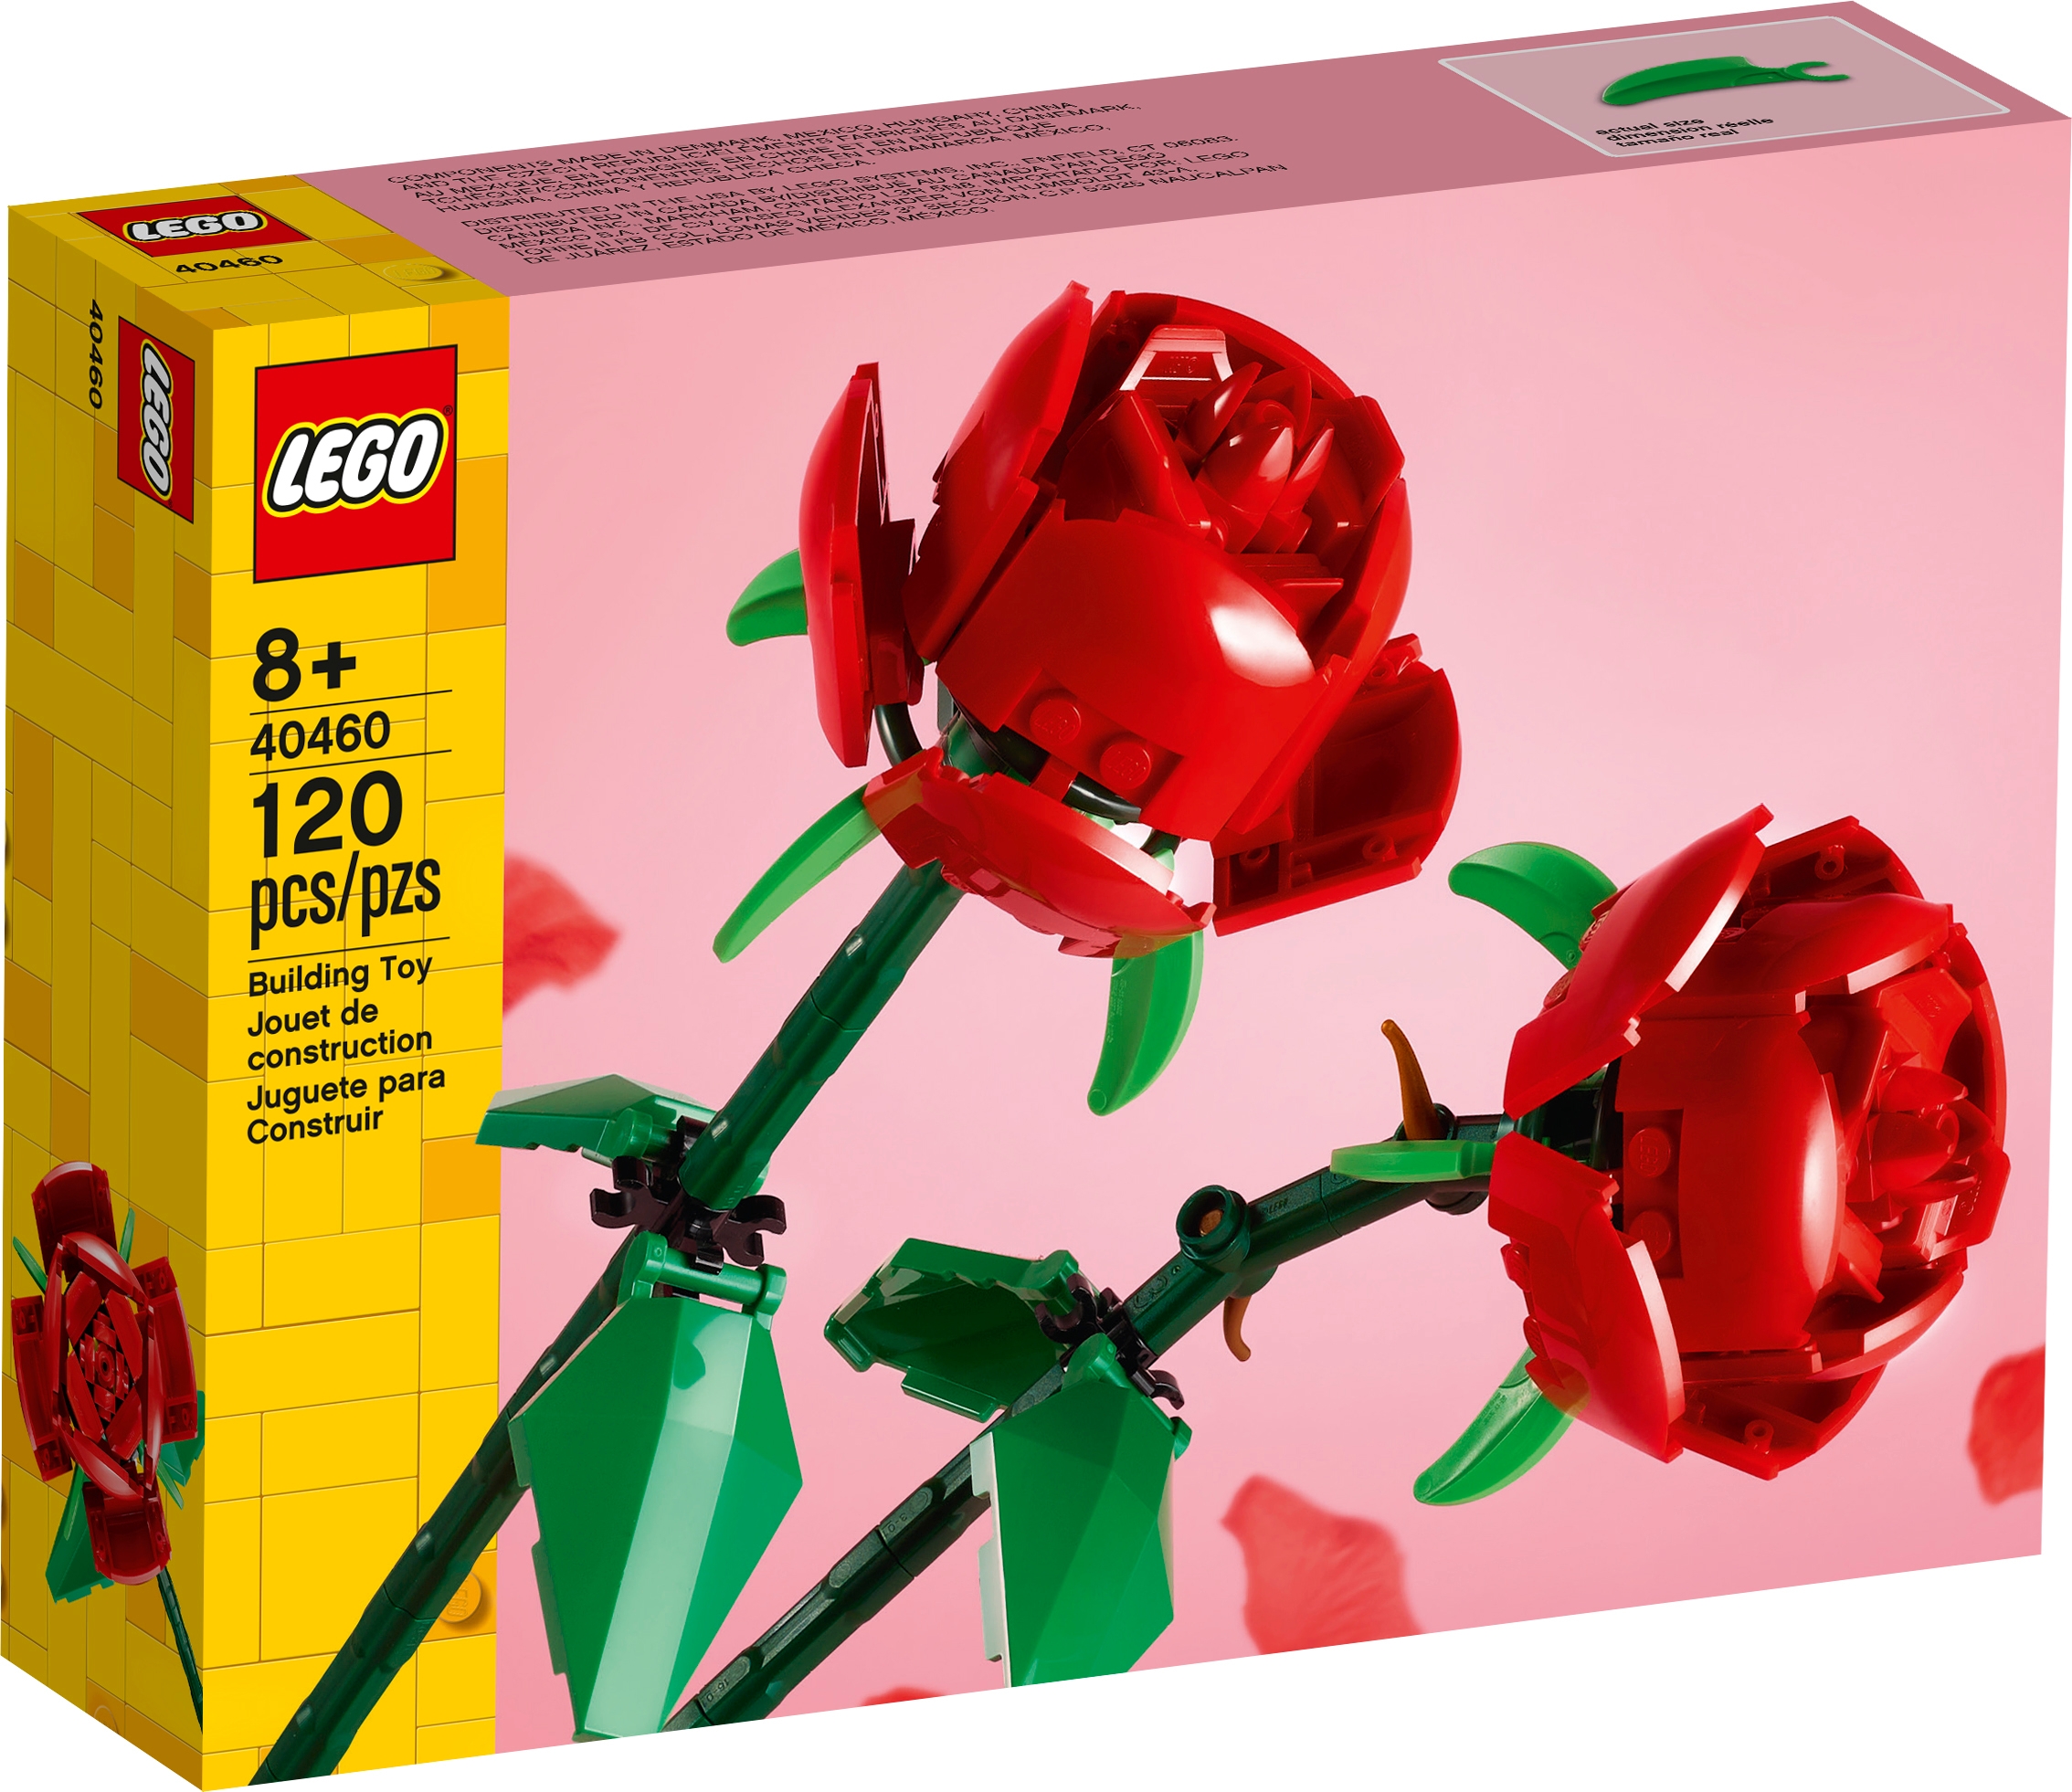 New LEGO Flower Sets Are Now Available - IGN